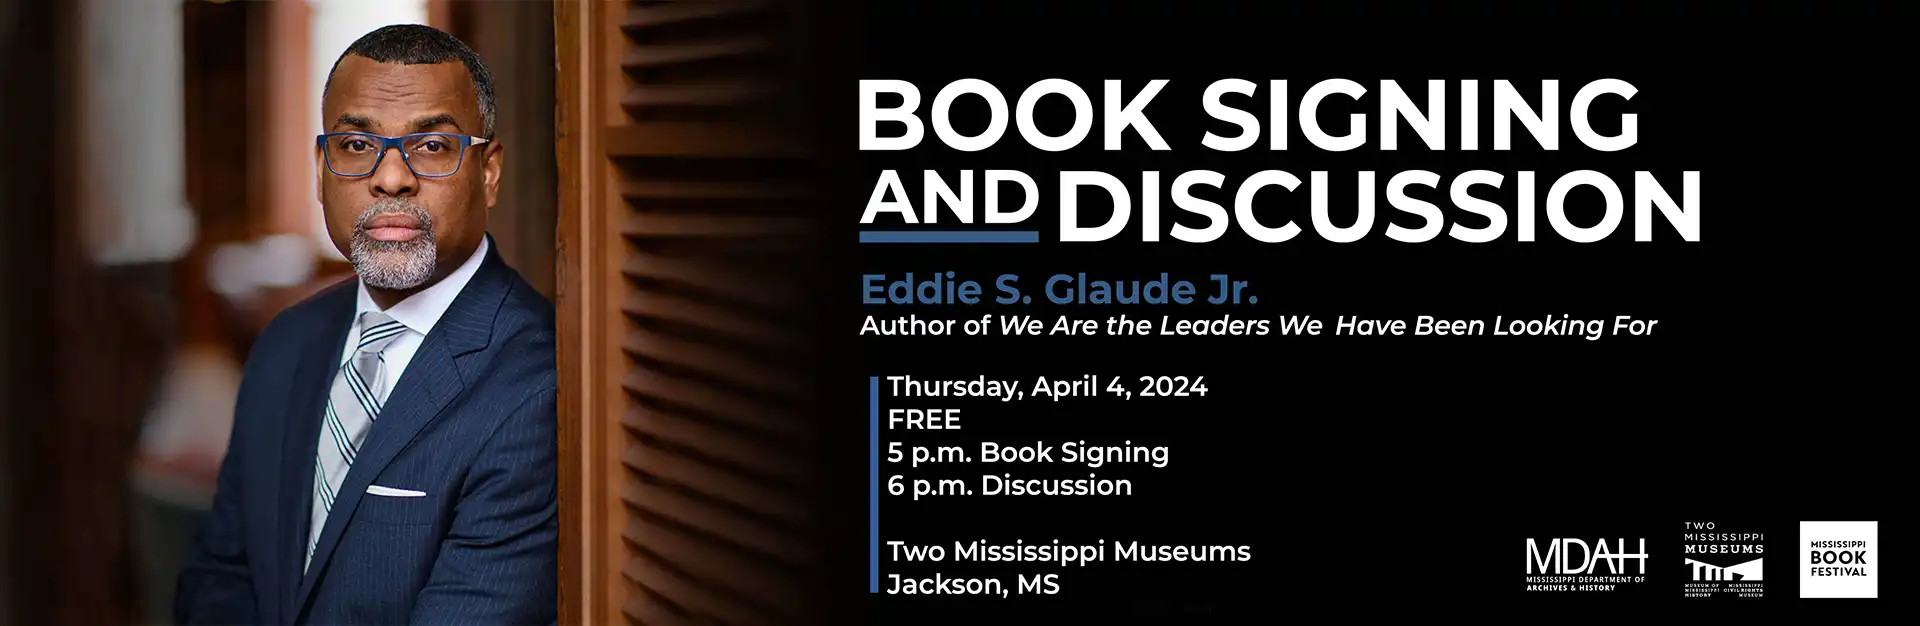 Eddie Glaude Book Signing and Discussion - April 4, 2024